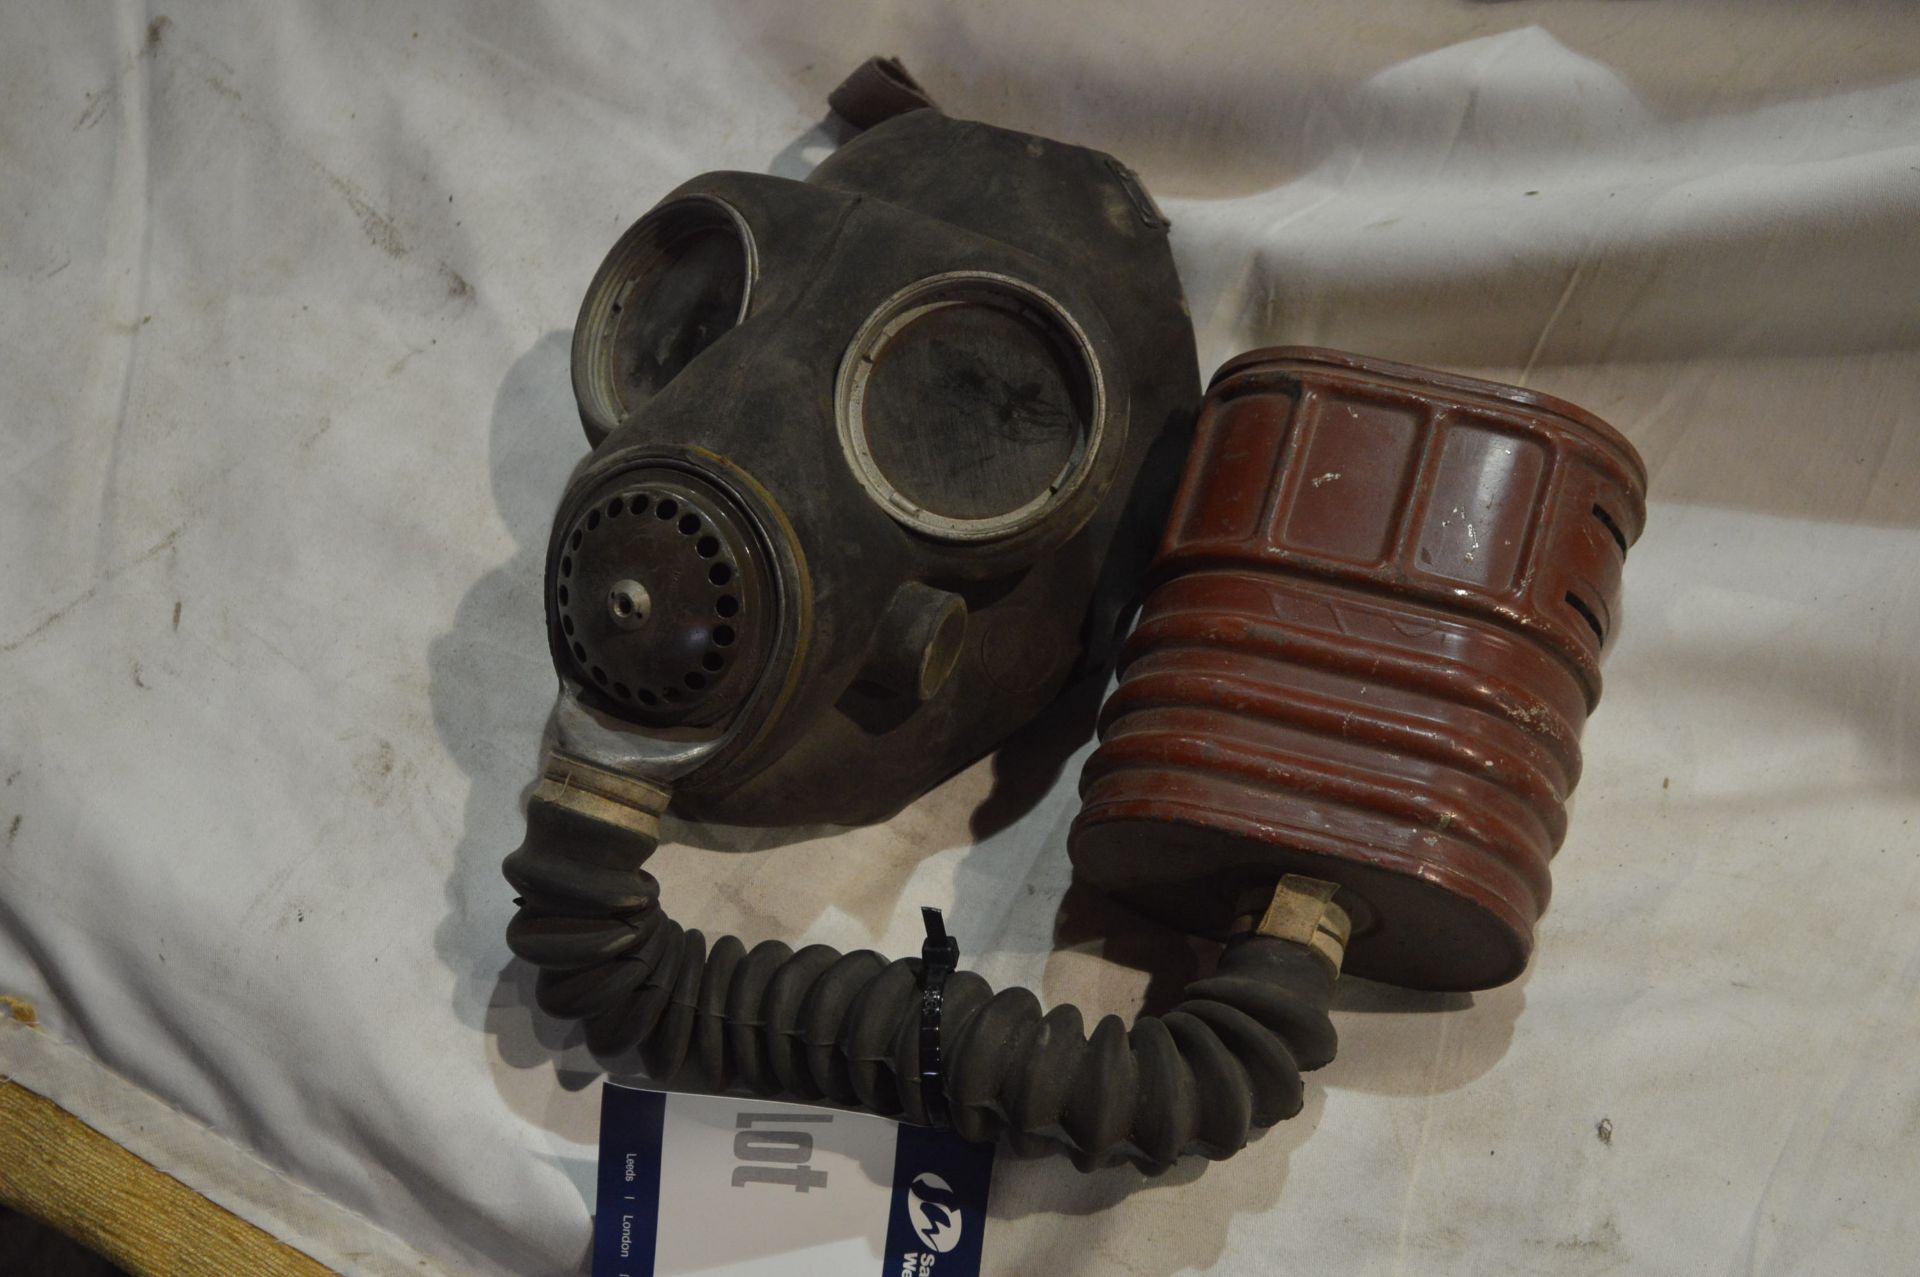 Gas Mask(Note VAT is not chargeable on hammer pric